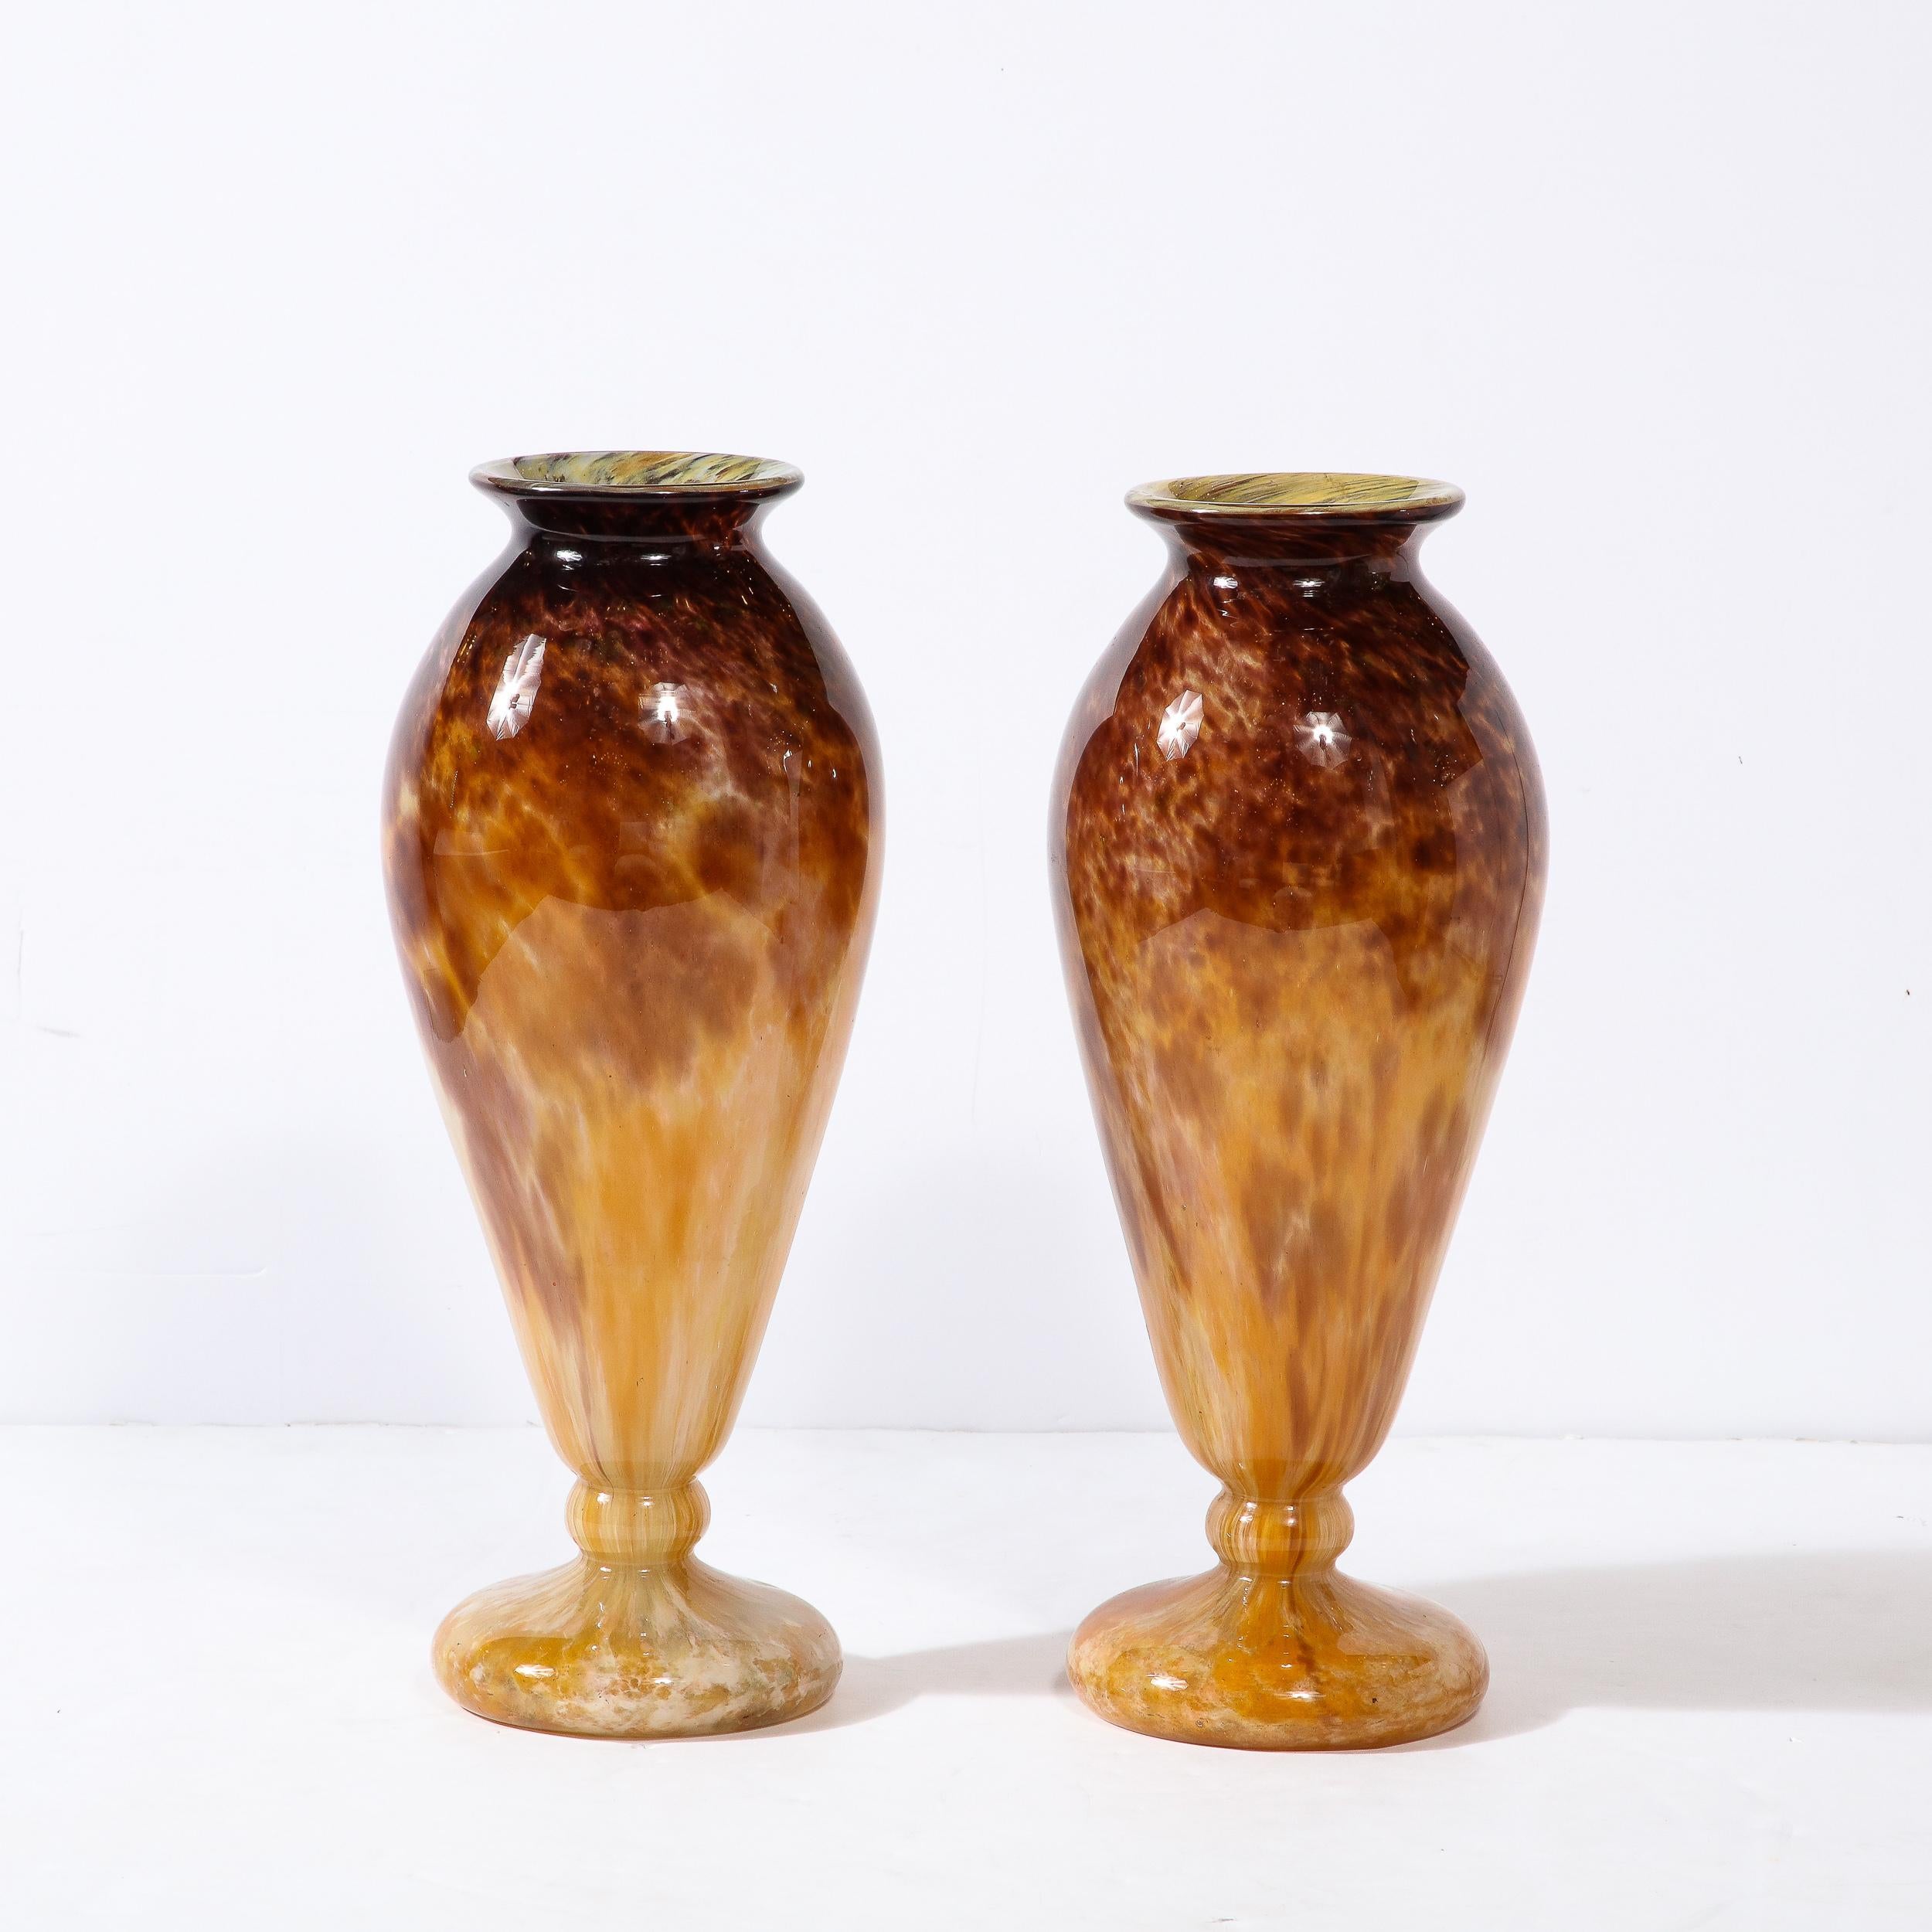 This gorgeous pair of Art Deco Vases in Smoked Amethyst & Amber Hued Glass were made by Schneider, and originate from France, Circa 1925. With a large profile and exceedingly elegant proportions, they feature an expansive openings that lead to a